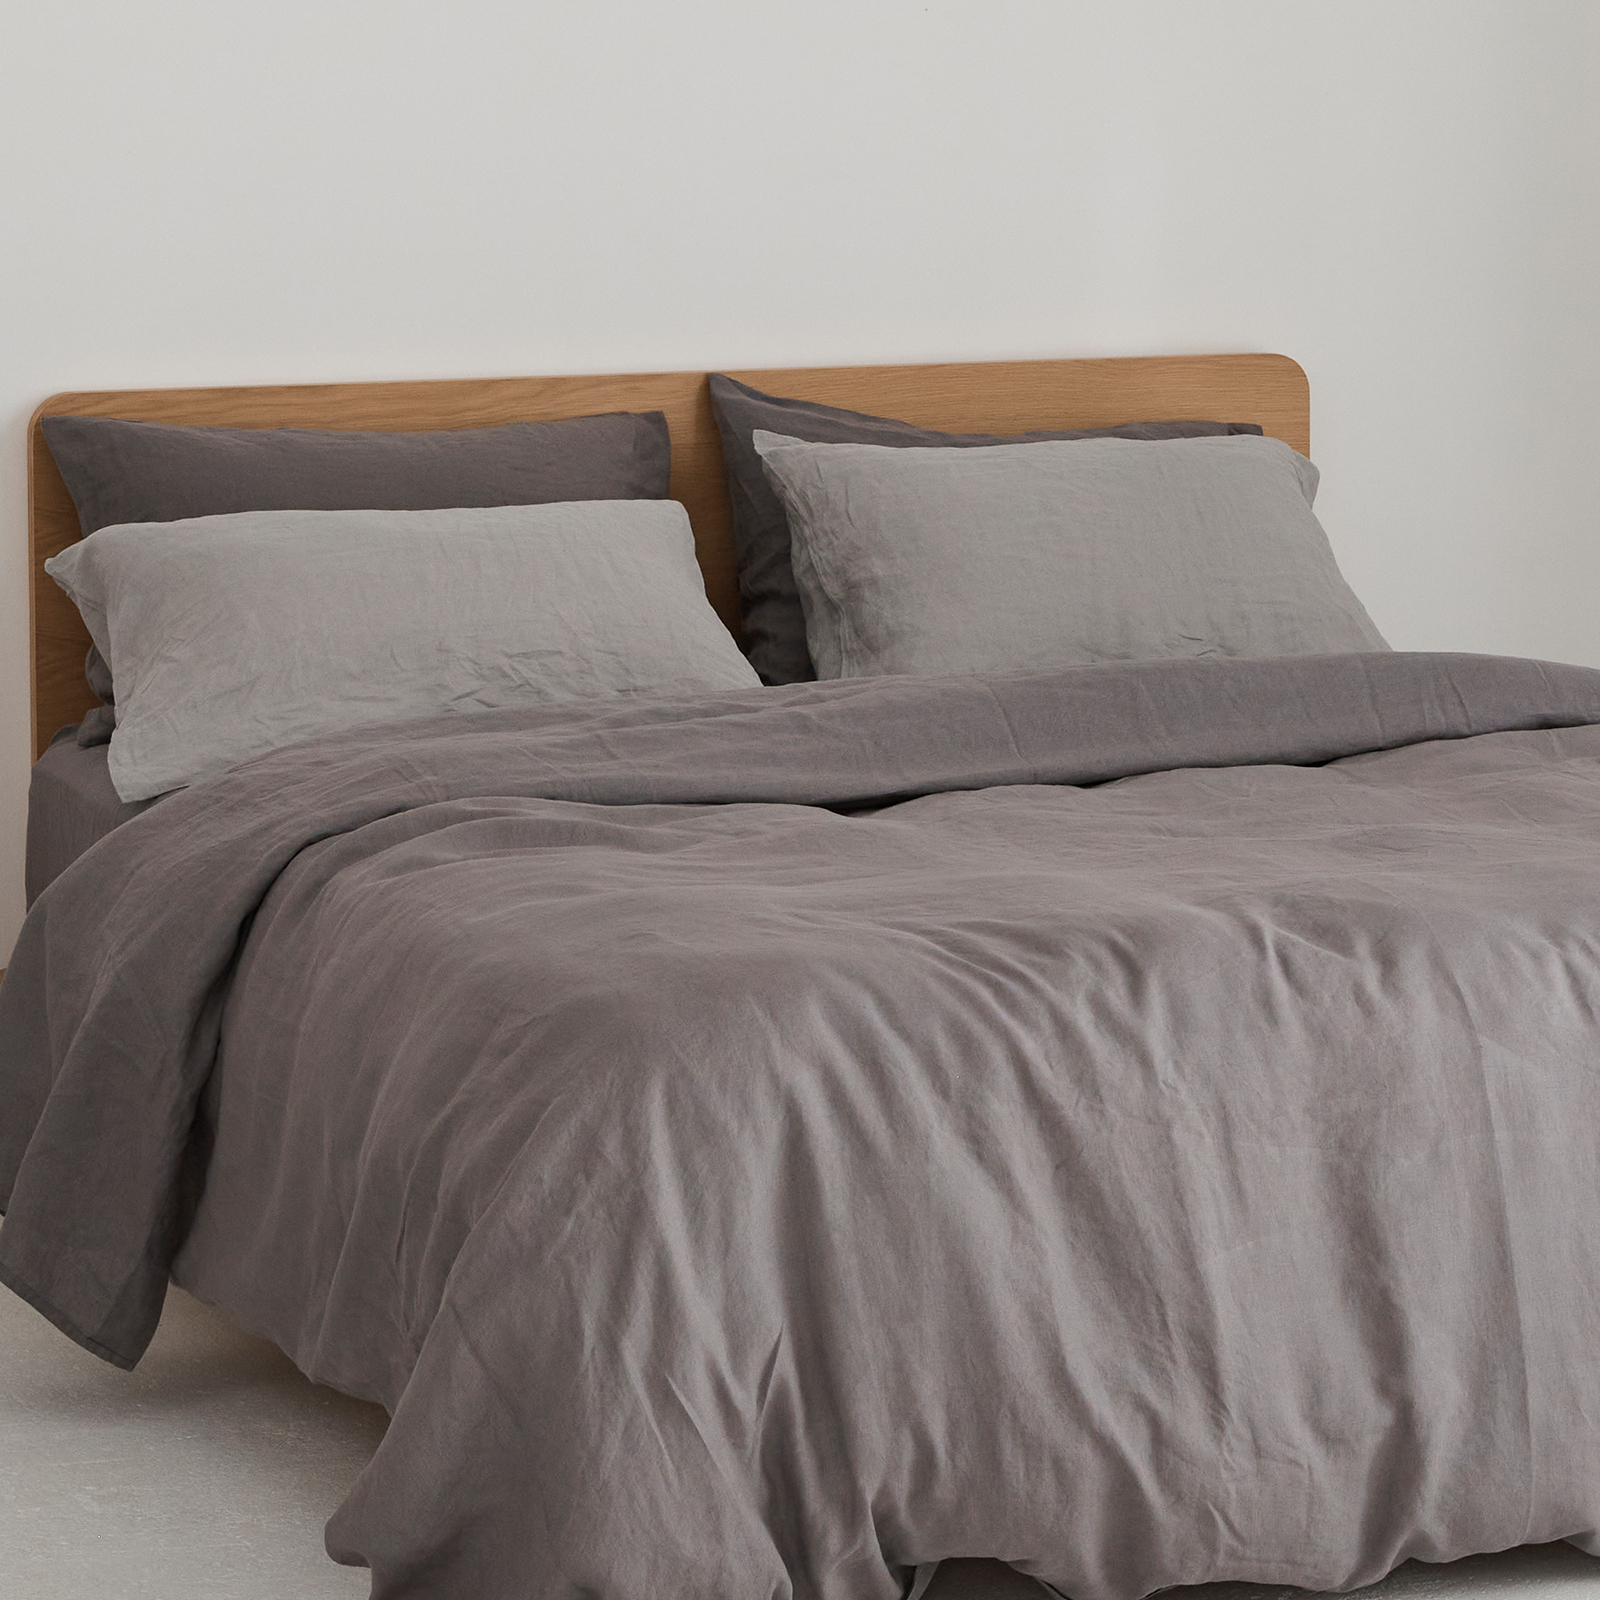 100% pure French linen Duvet Cover in Warm Grey